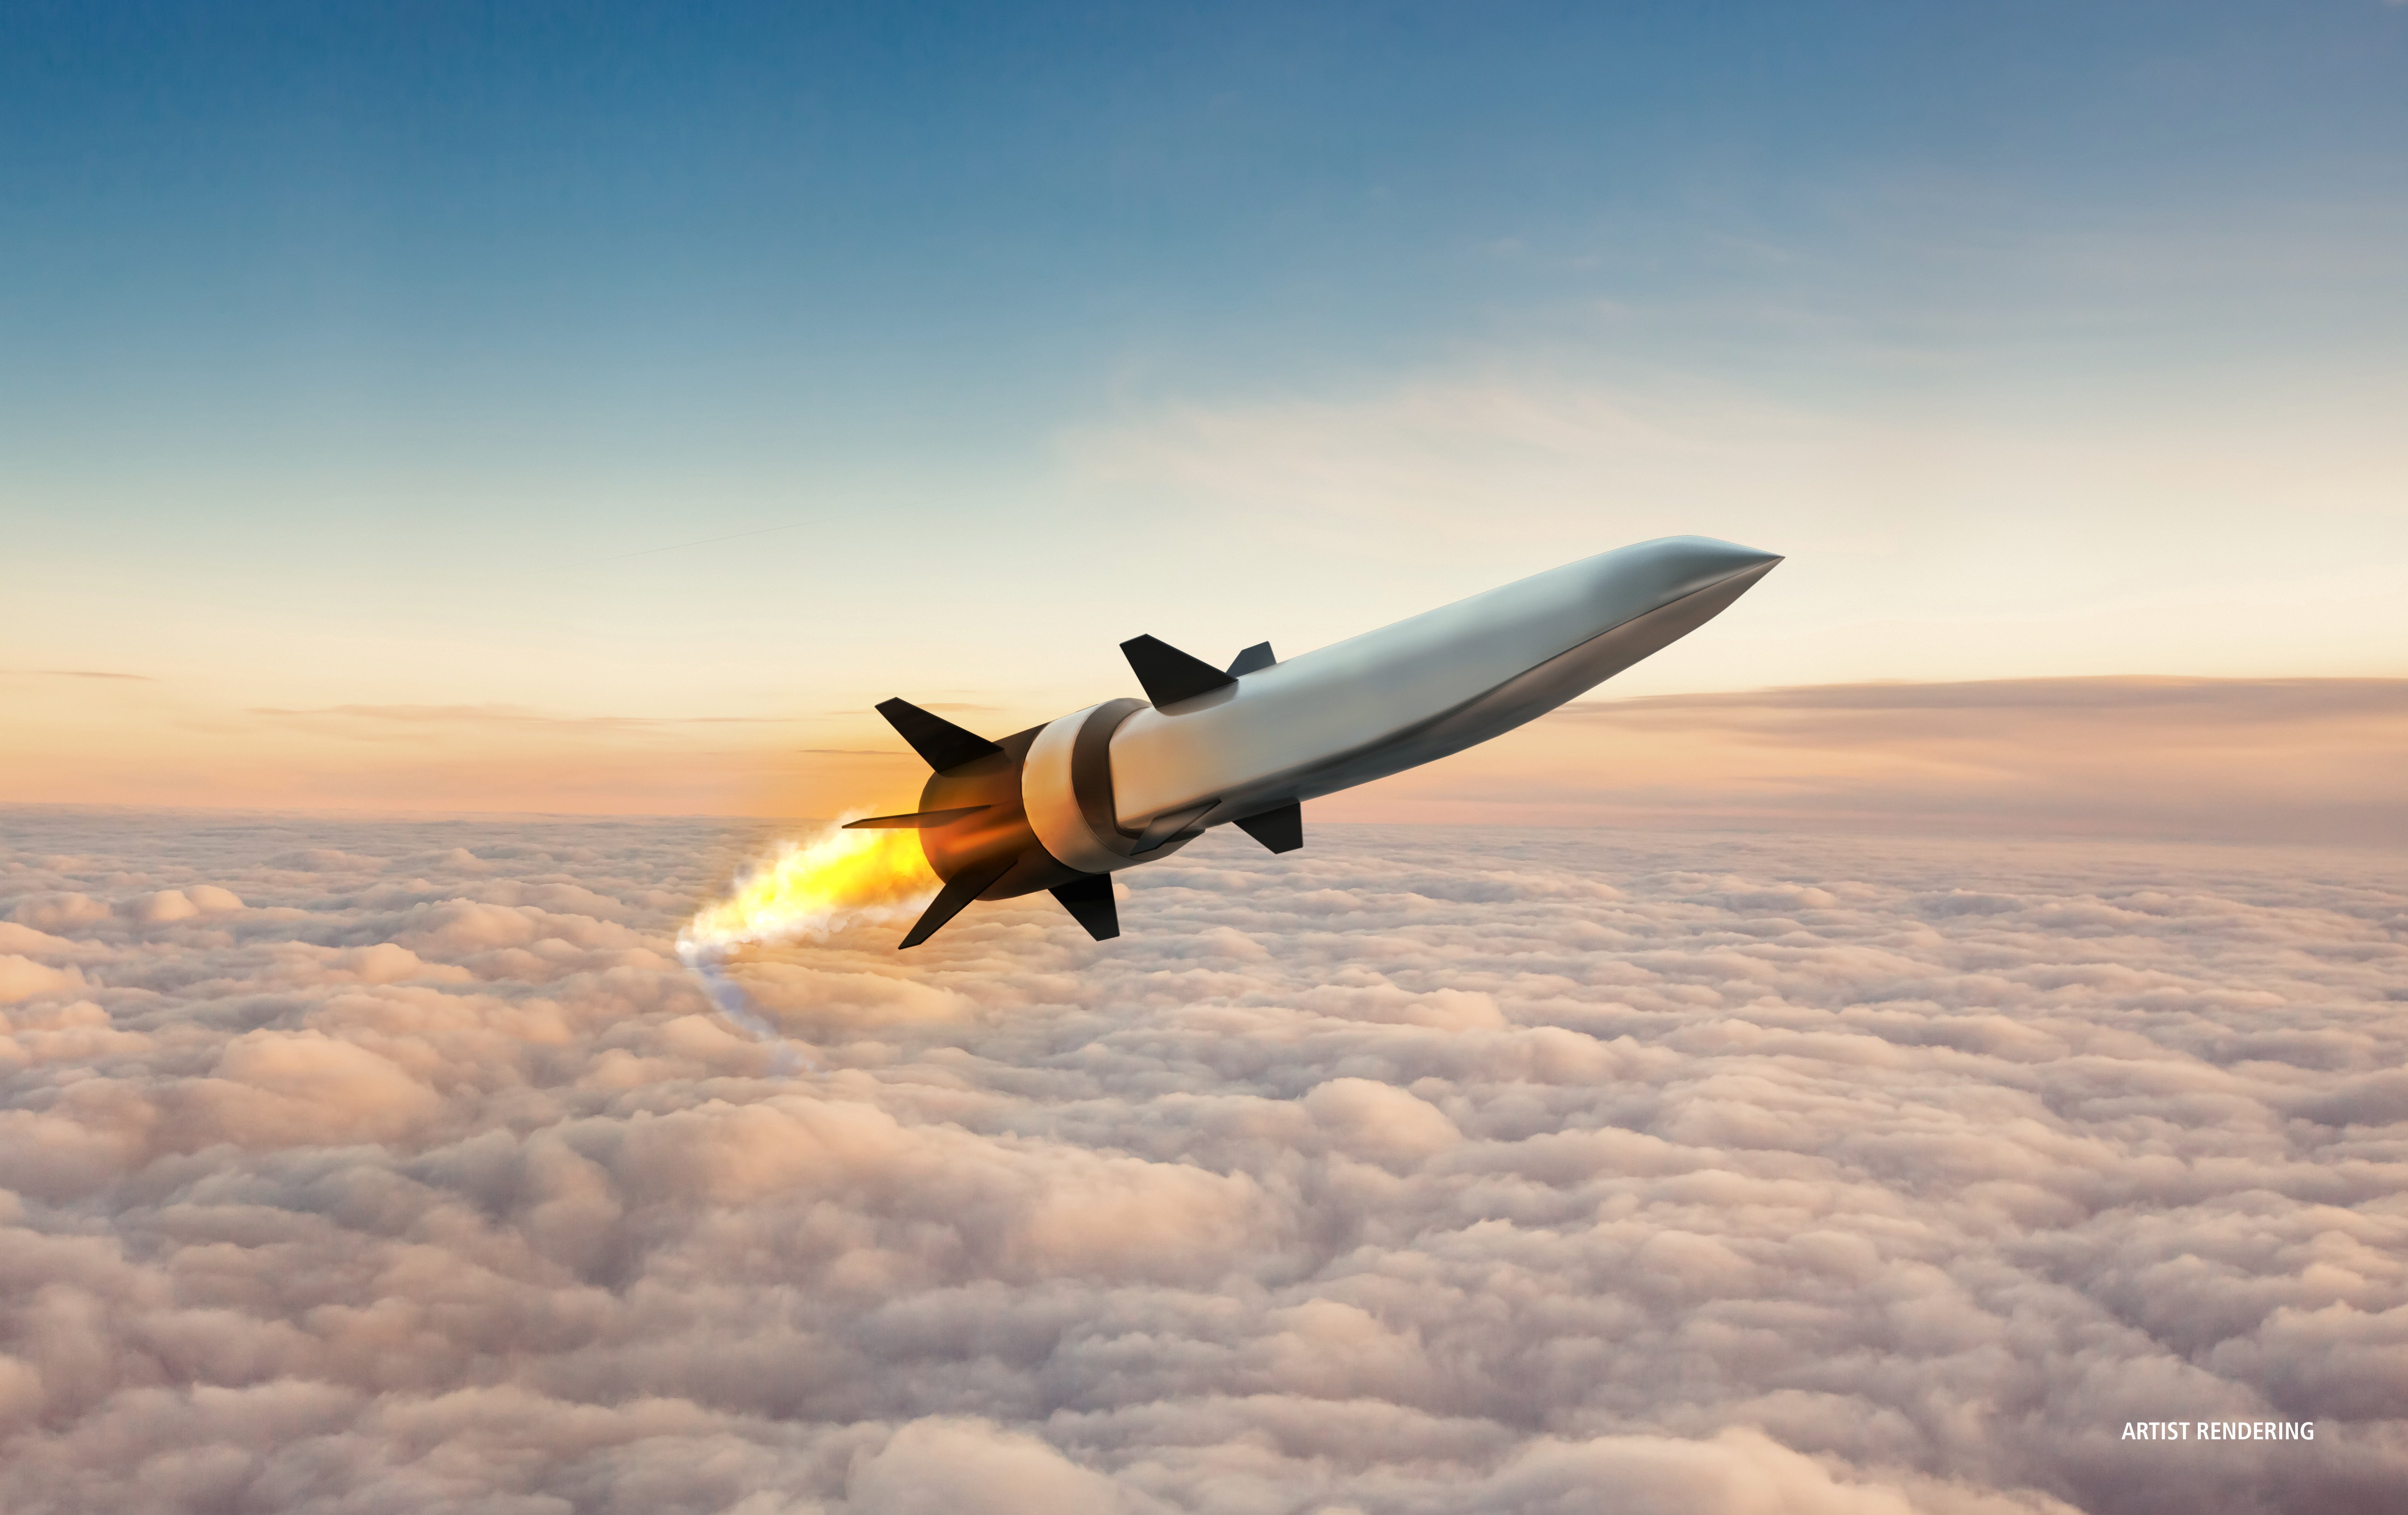 Last week, the US carried out a successful test of a hypersonic missile